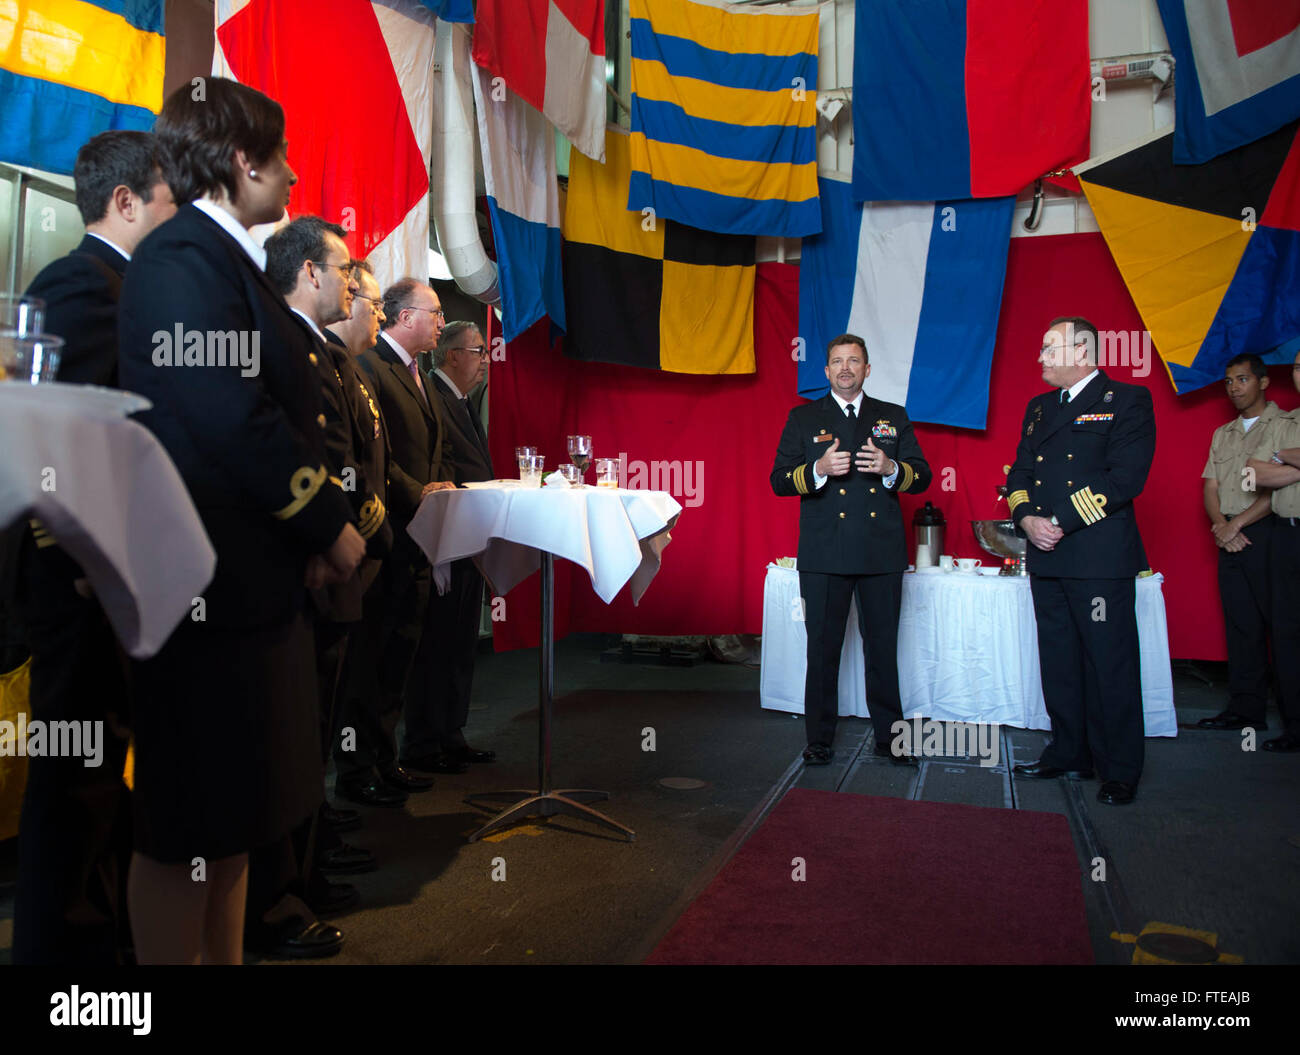 140228-N-SK590-116: CARTAGENA, Spain (Feb. 28, 2014) - Cmdr. Kenneth Anderson, executive officer of the guided-missile frigate USS Simpson (FFG 56), addresses guests during a reception aboard Simpson. Simpson is on a scheduled deployment conducting maritime security operations and theater security cooperation efforts in the 6th fleet area of operations. (U.S. Navy photo by Mass Communication Specialist 2nd Class Tim D. Godbee/Released) Stock Photo